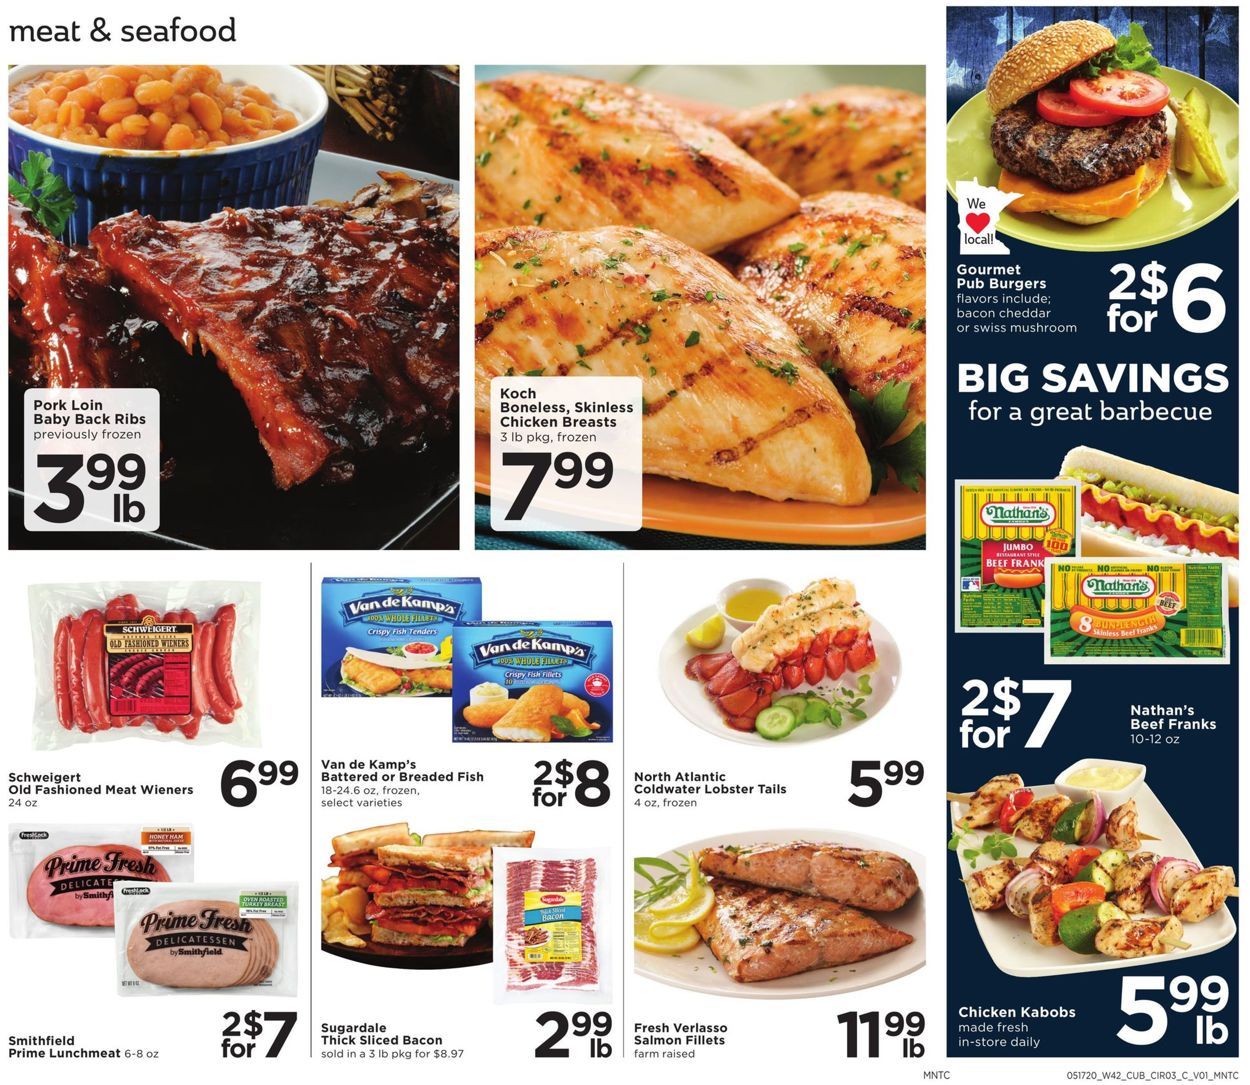 Catalogue Cub Foods from 05/17/2020